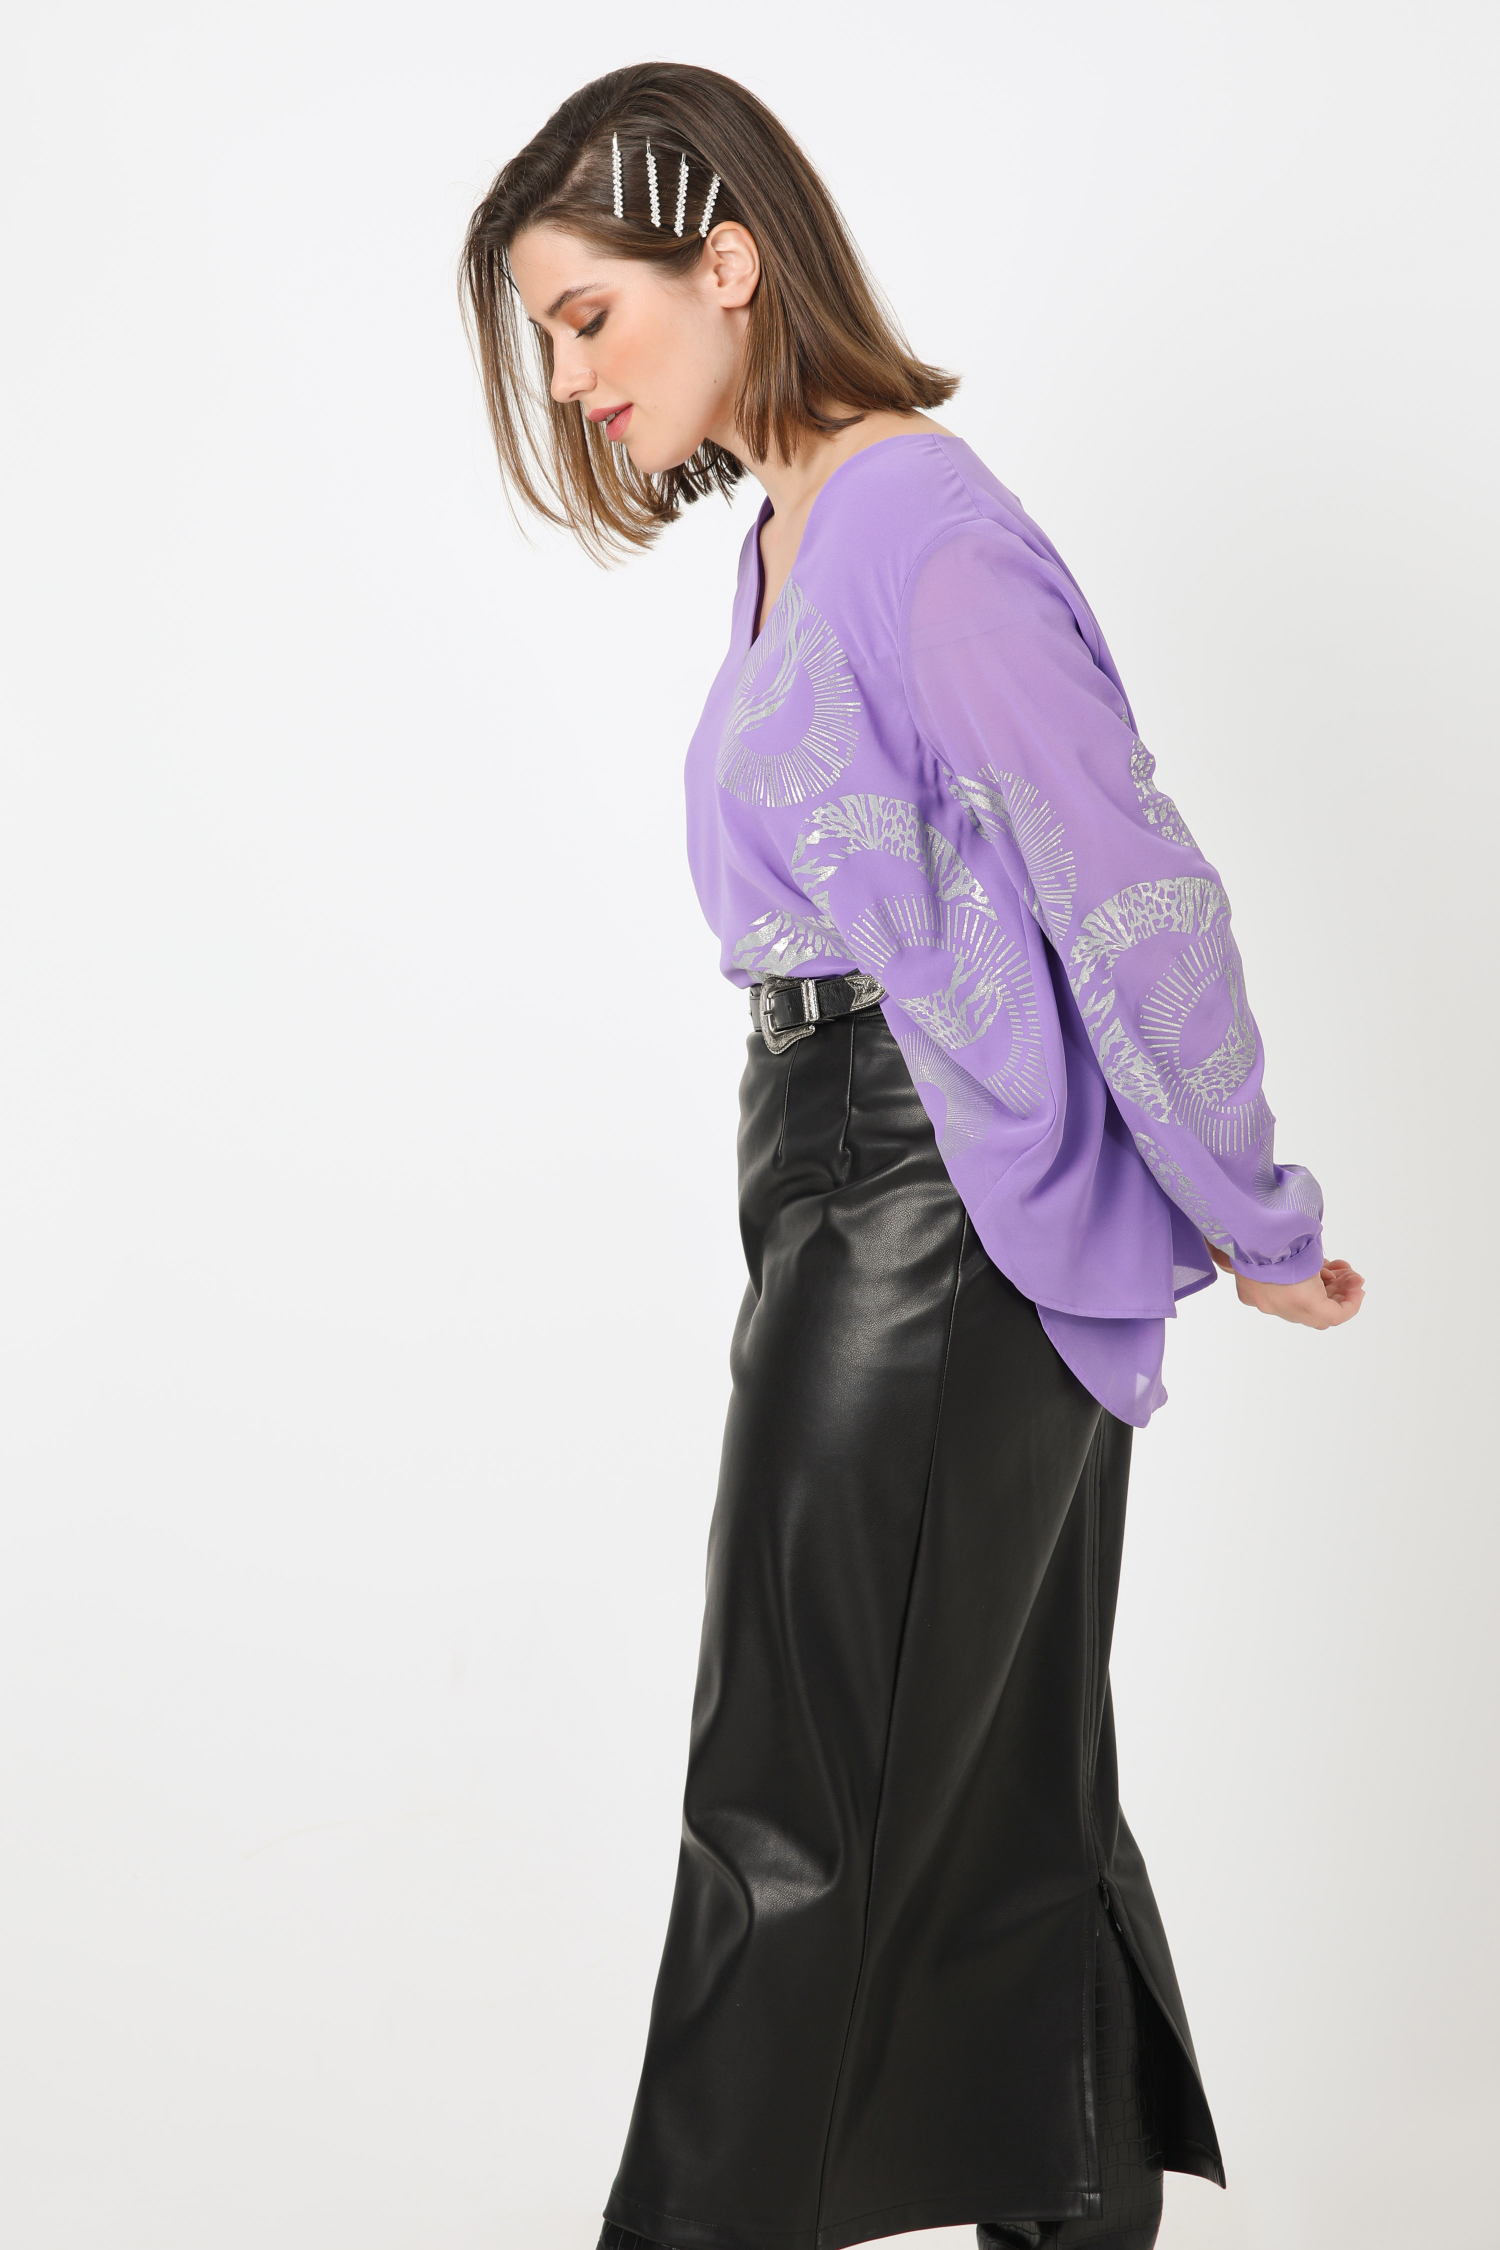 Plain voile blouse layered with silkscreen printing